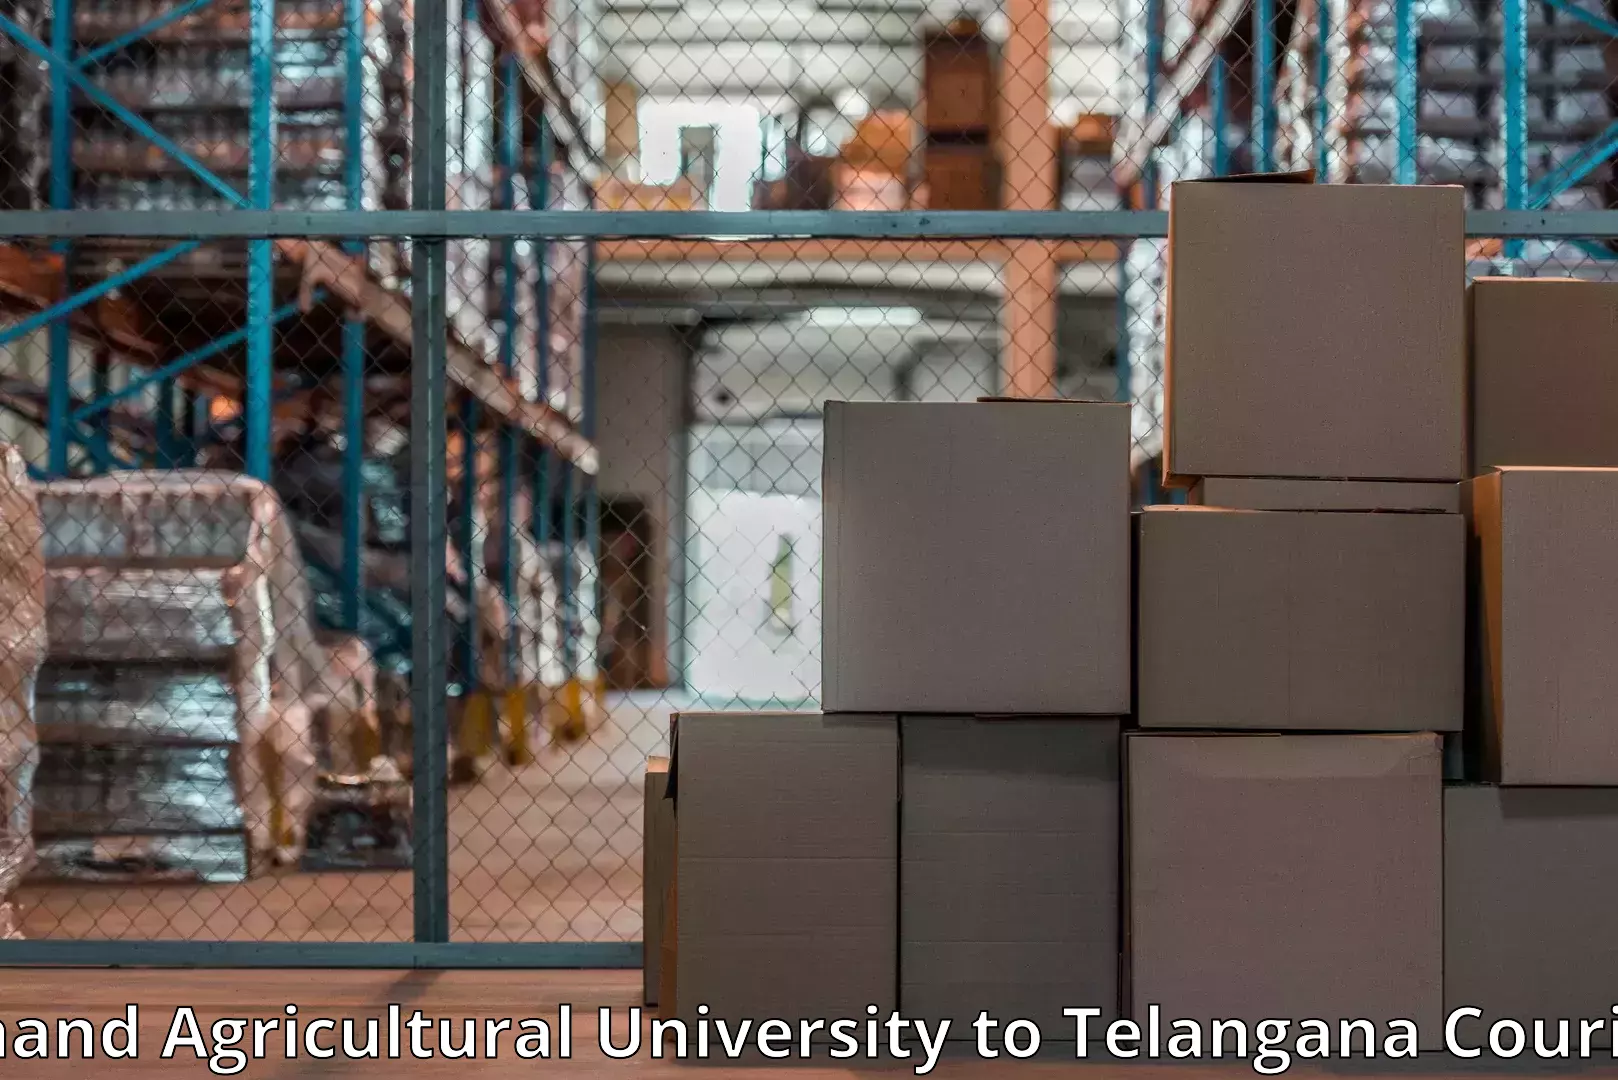 Furniture relocation experts in Anand Agricultural University to Kodad